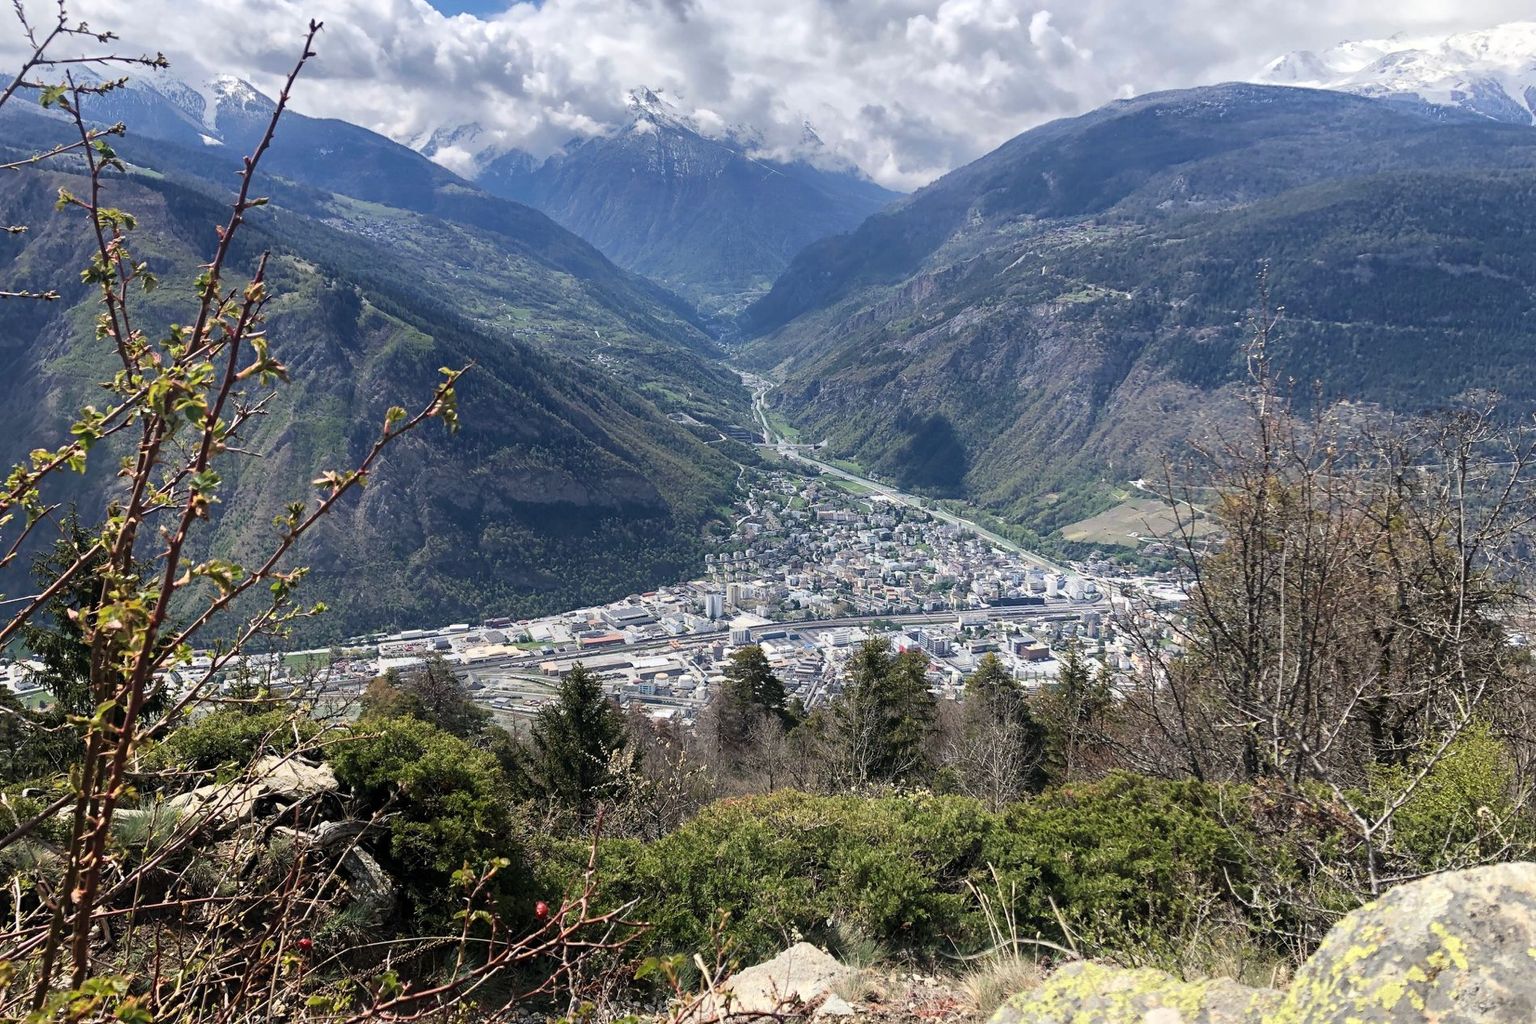 View of the Alpine town of Visp